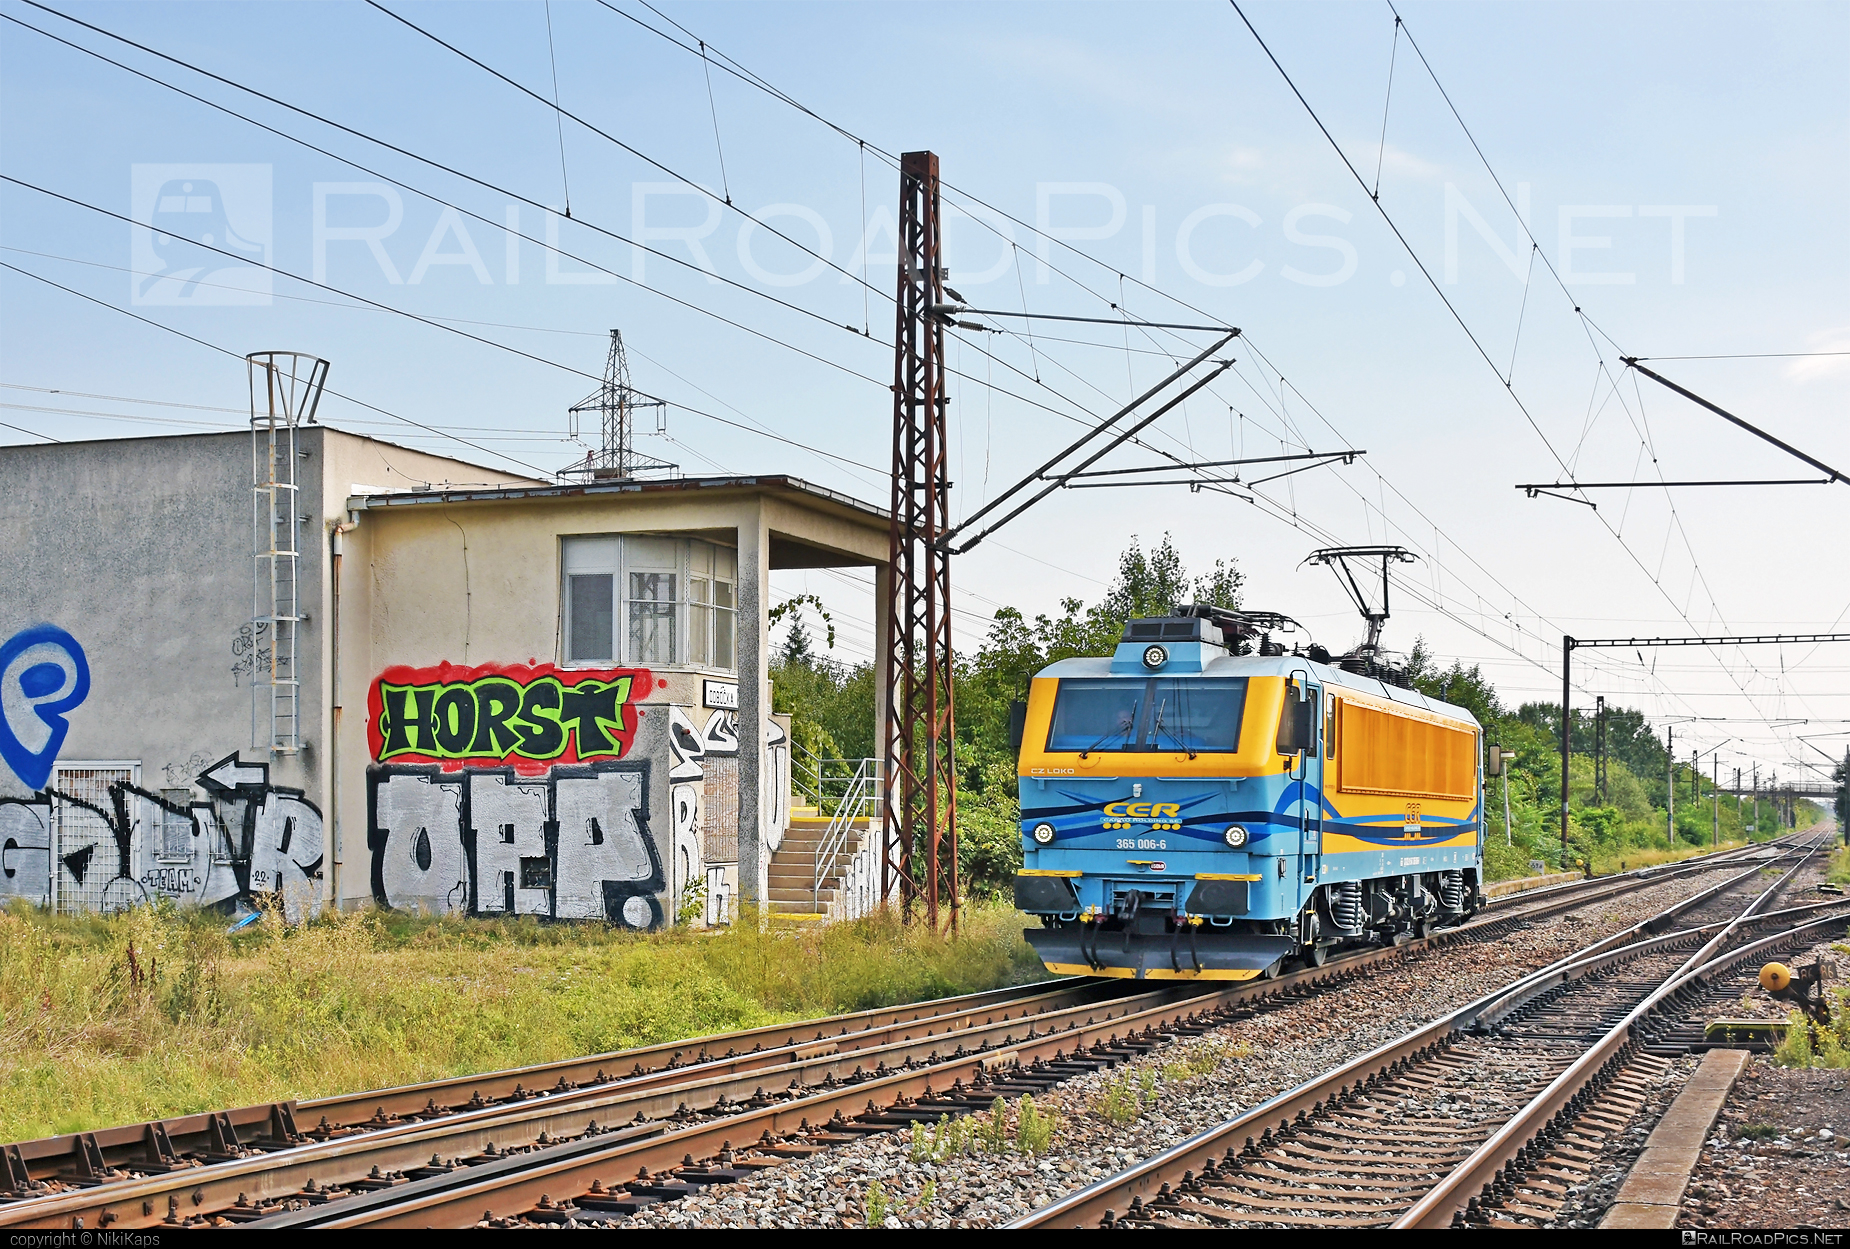 CZ LOKO EffiLiner 3000 - 365 006-6 operated by CER Slovakia a.s. #belgicanka #cer #cersk #cerslovakia #cerslovakiaas #czloko #czlokoas #effiliner #effiliner3000 #sncb12 #sncbclass12